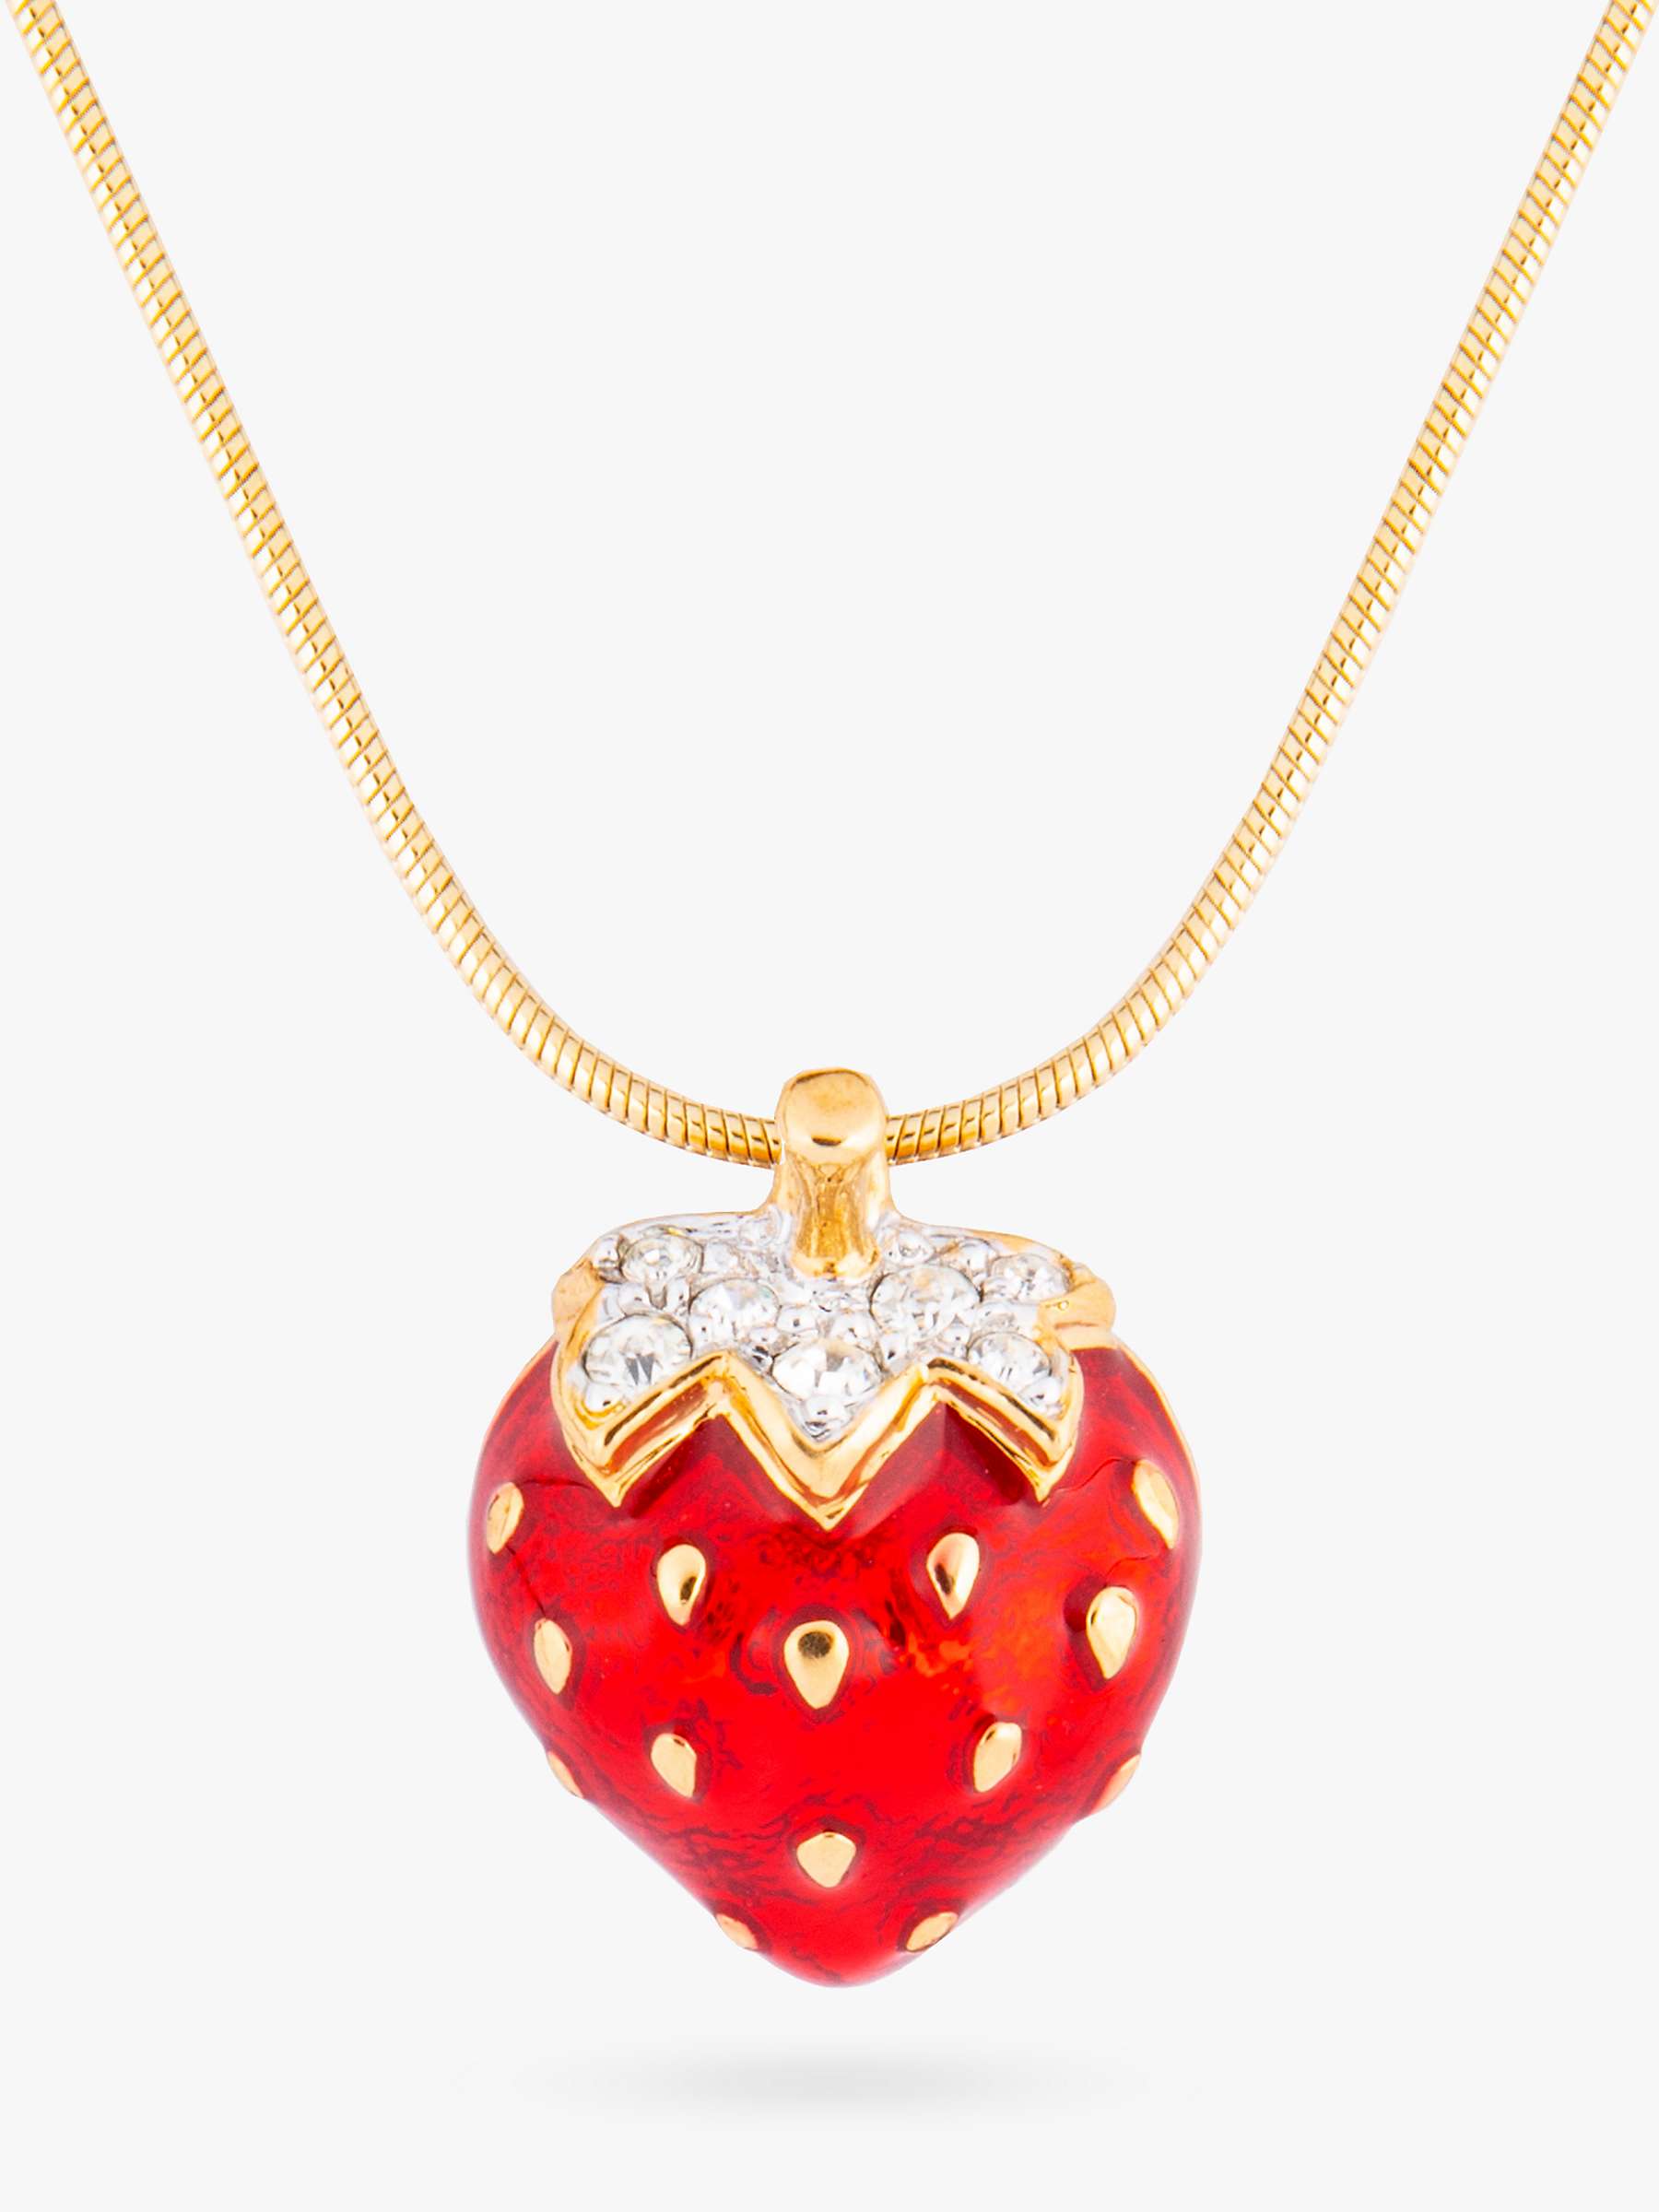 Buy Eclectica Vintage Gold Plated Enamel & Swarovski Crystal Strawberry Pendant Necklace, Dated Circa 1980s Online at johnlewis.com